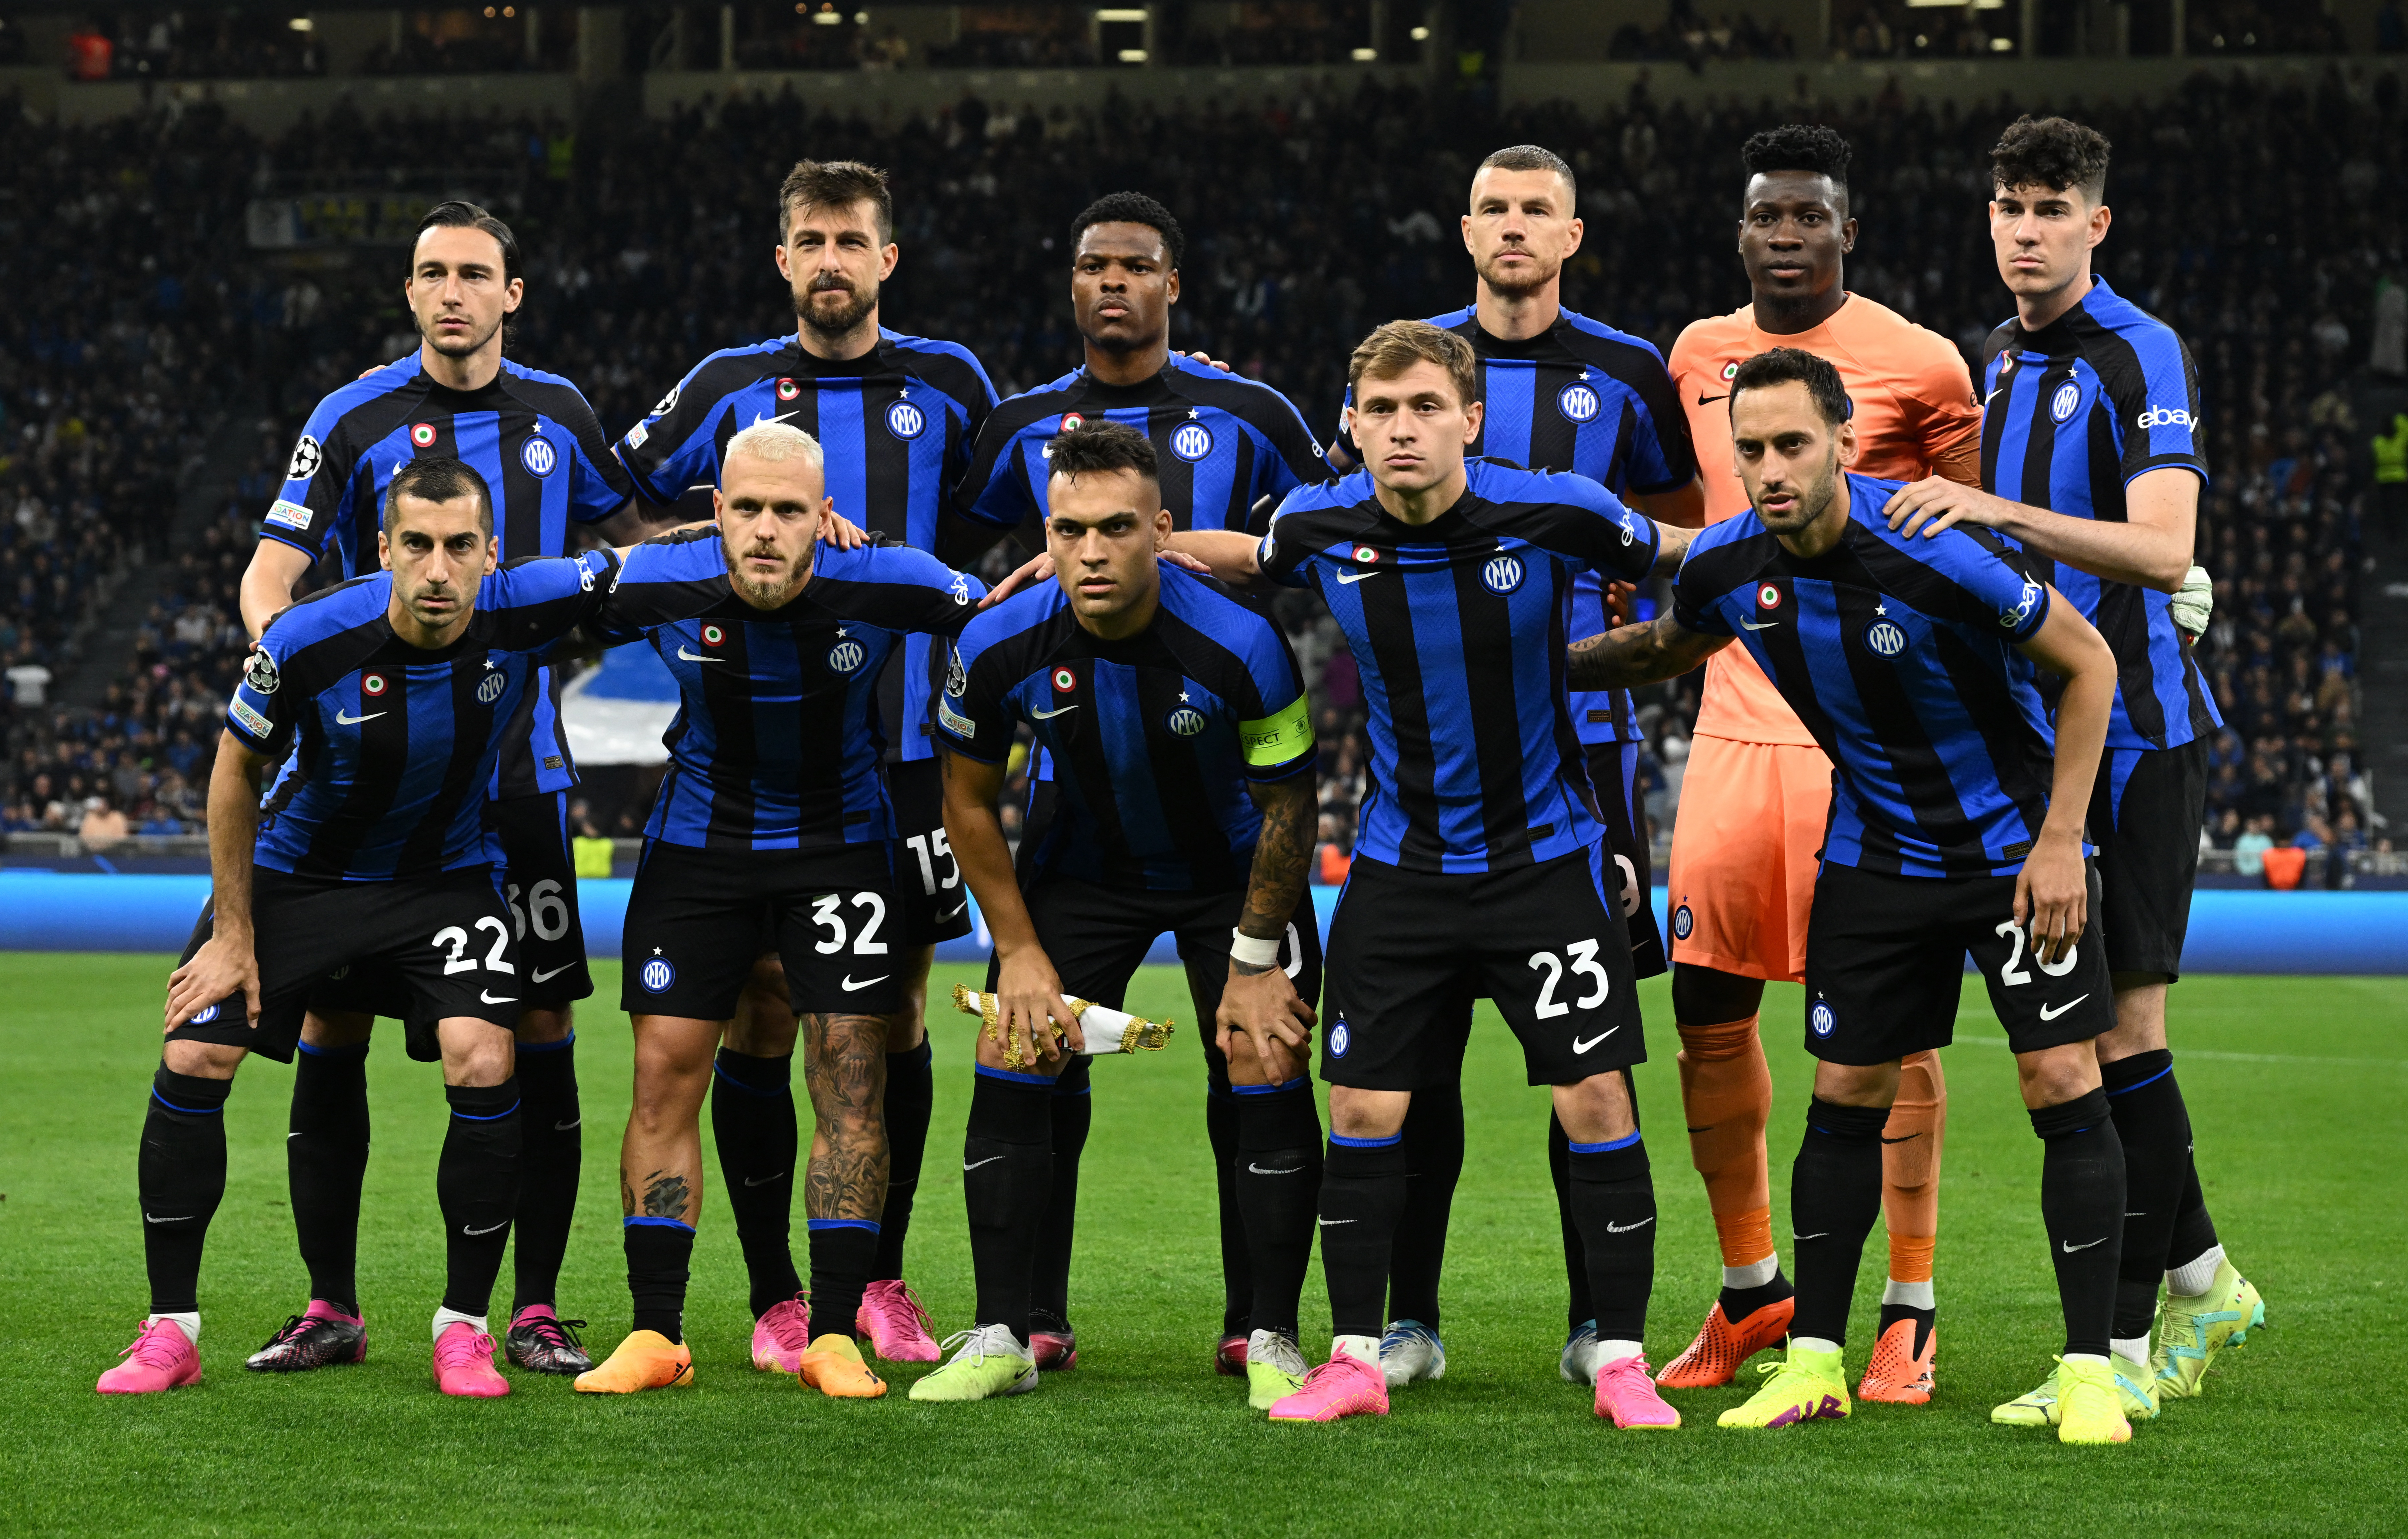 Inter eliminated Milan in the semifinals of the Champions League and will once again be one game away from the title in Europe after 13 years (REUTERS/Alberto Lingria)